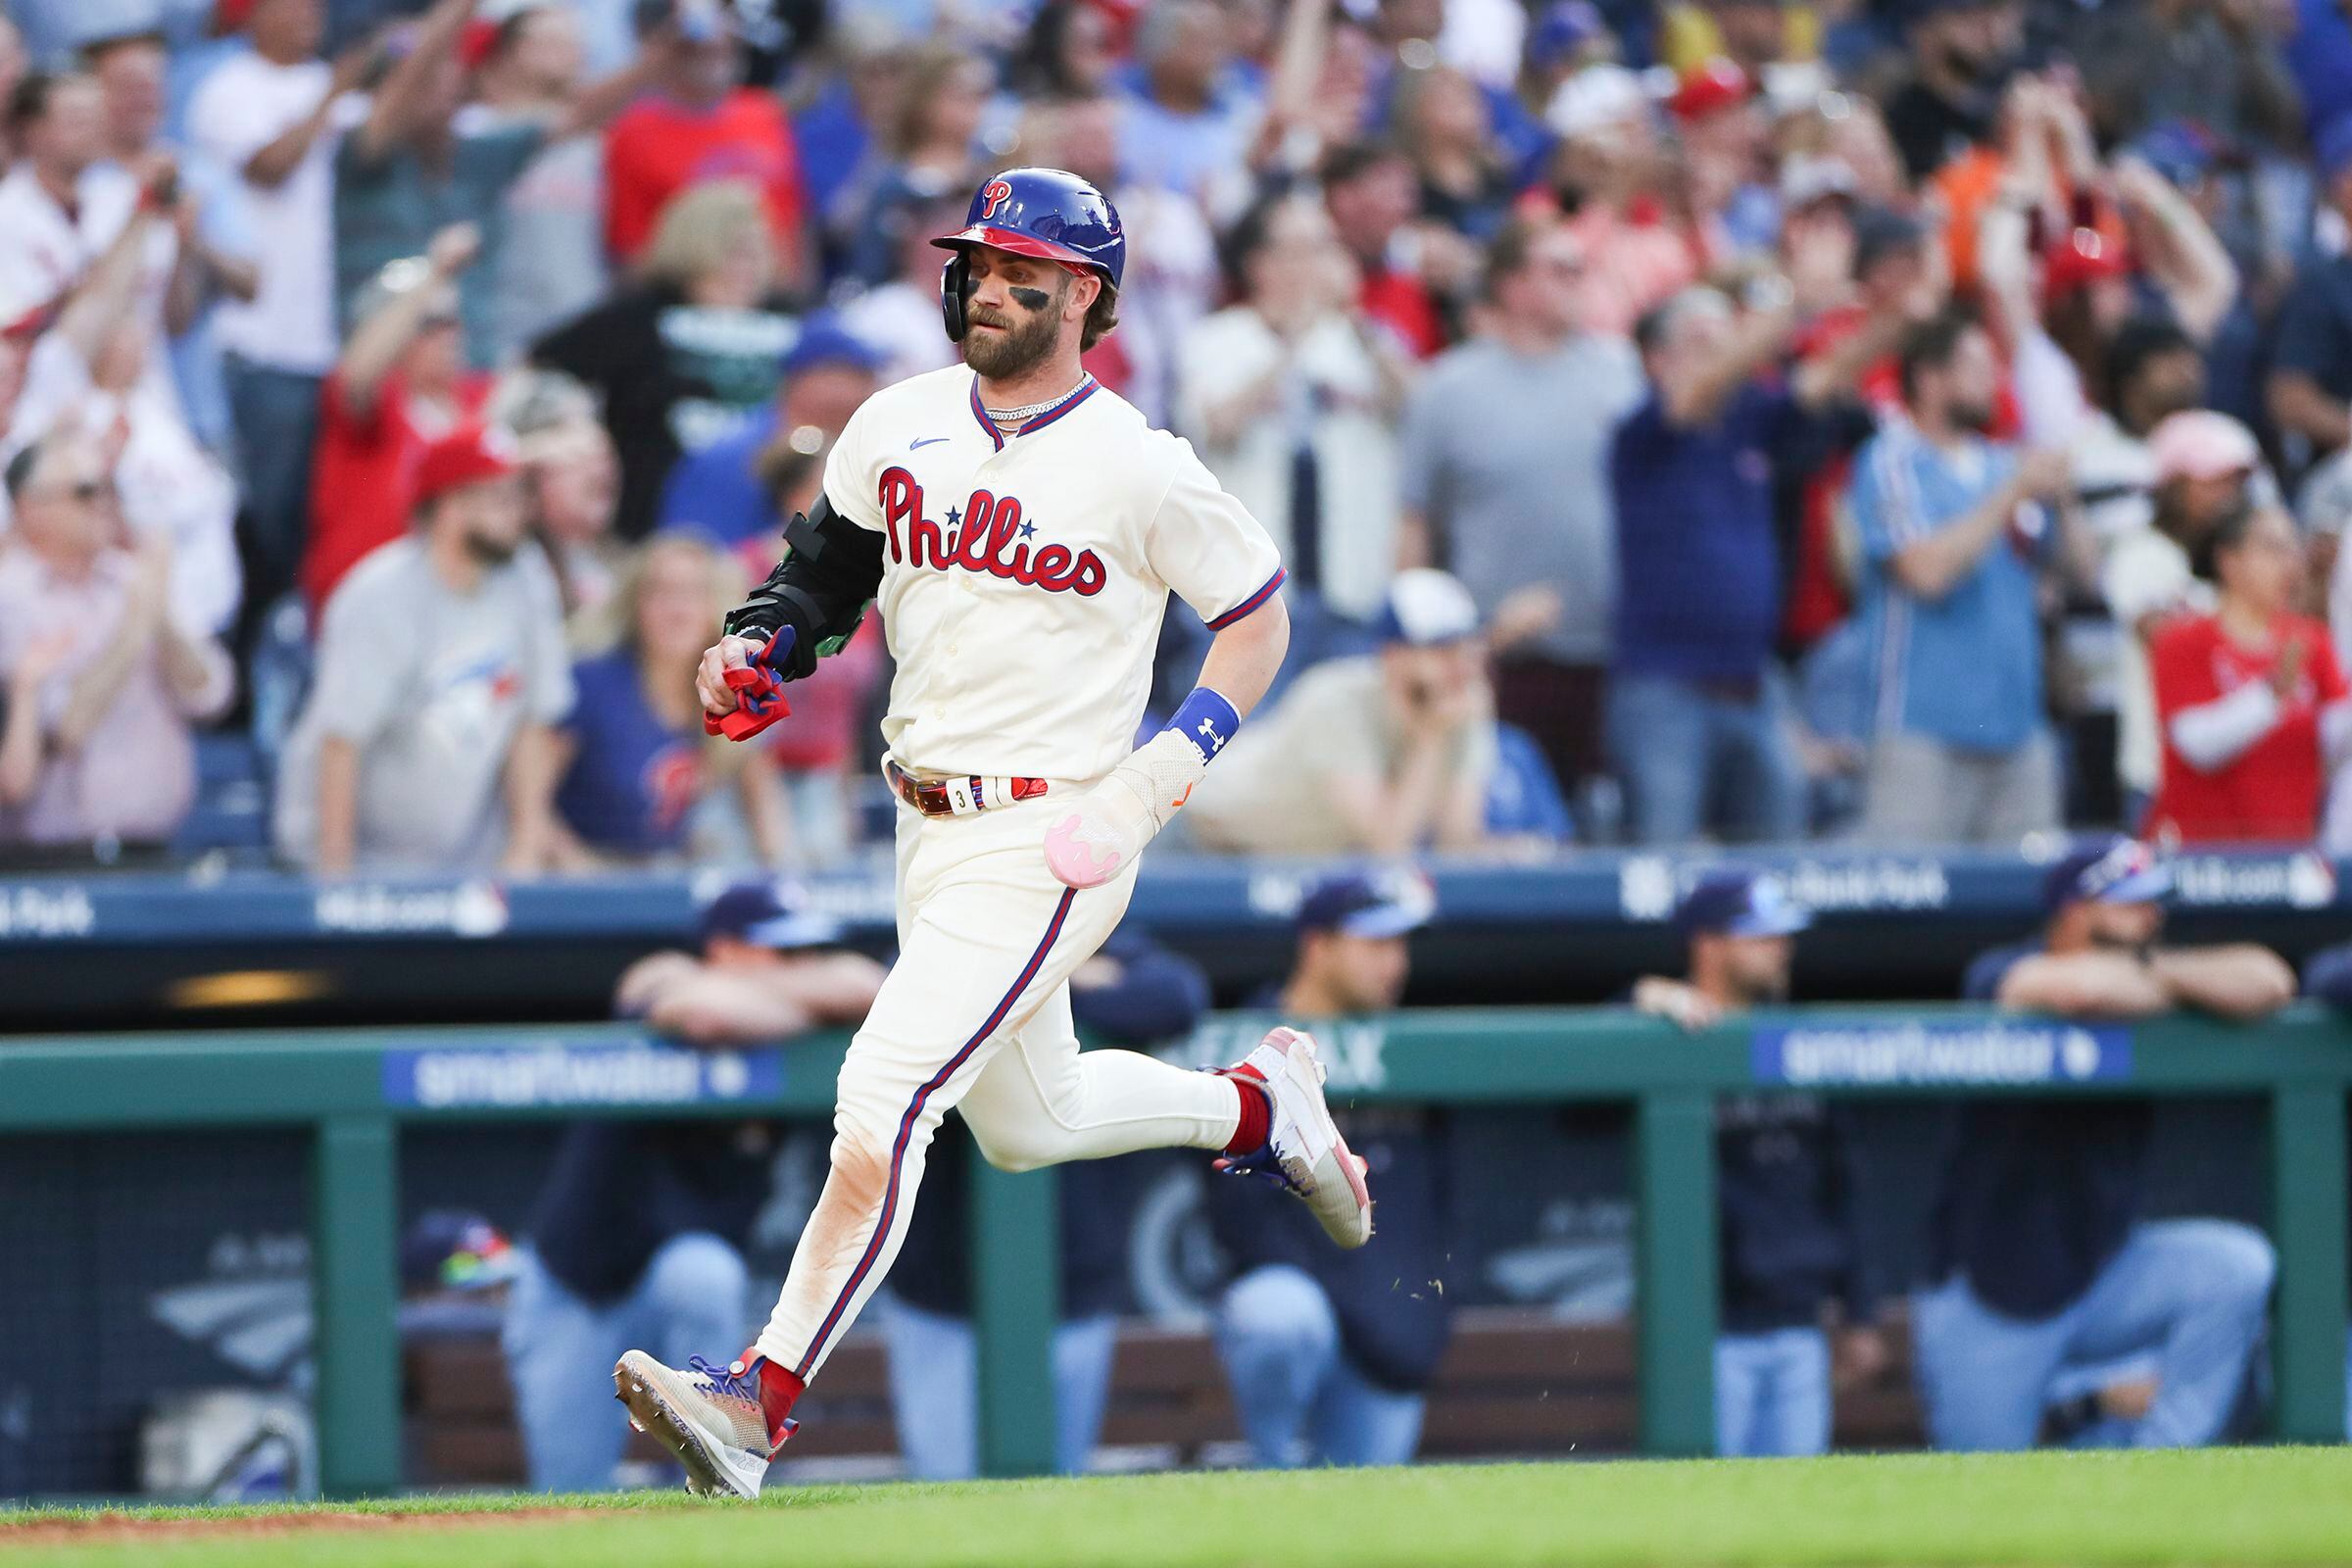 The Phillies walk off the Blue Jays in 10 innings after Bo Bichette sends a  nuke past Vlad Guerrero allowing Edmundo Sosa to score : r/baseball